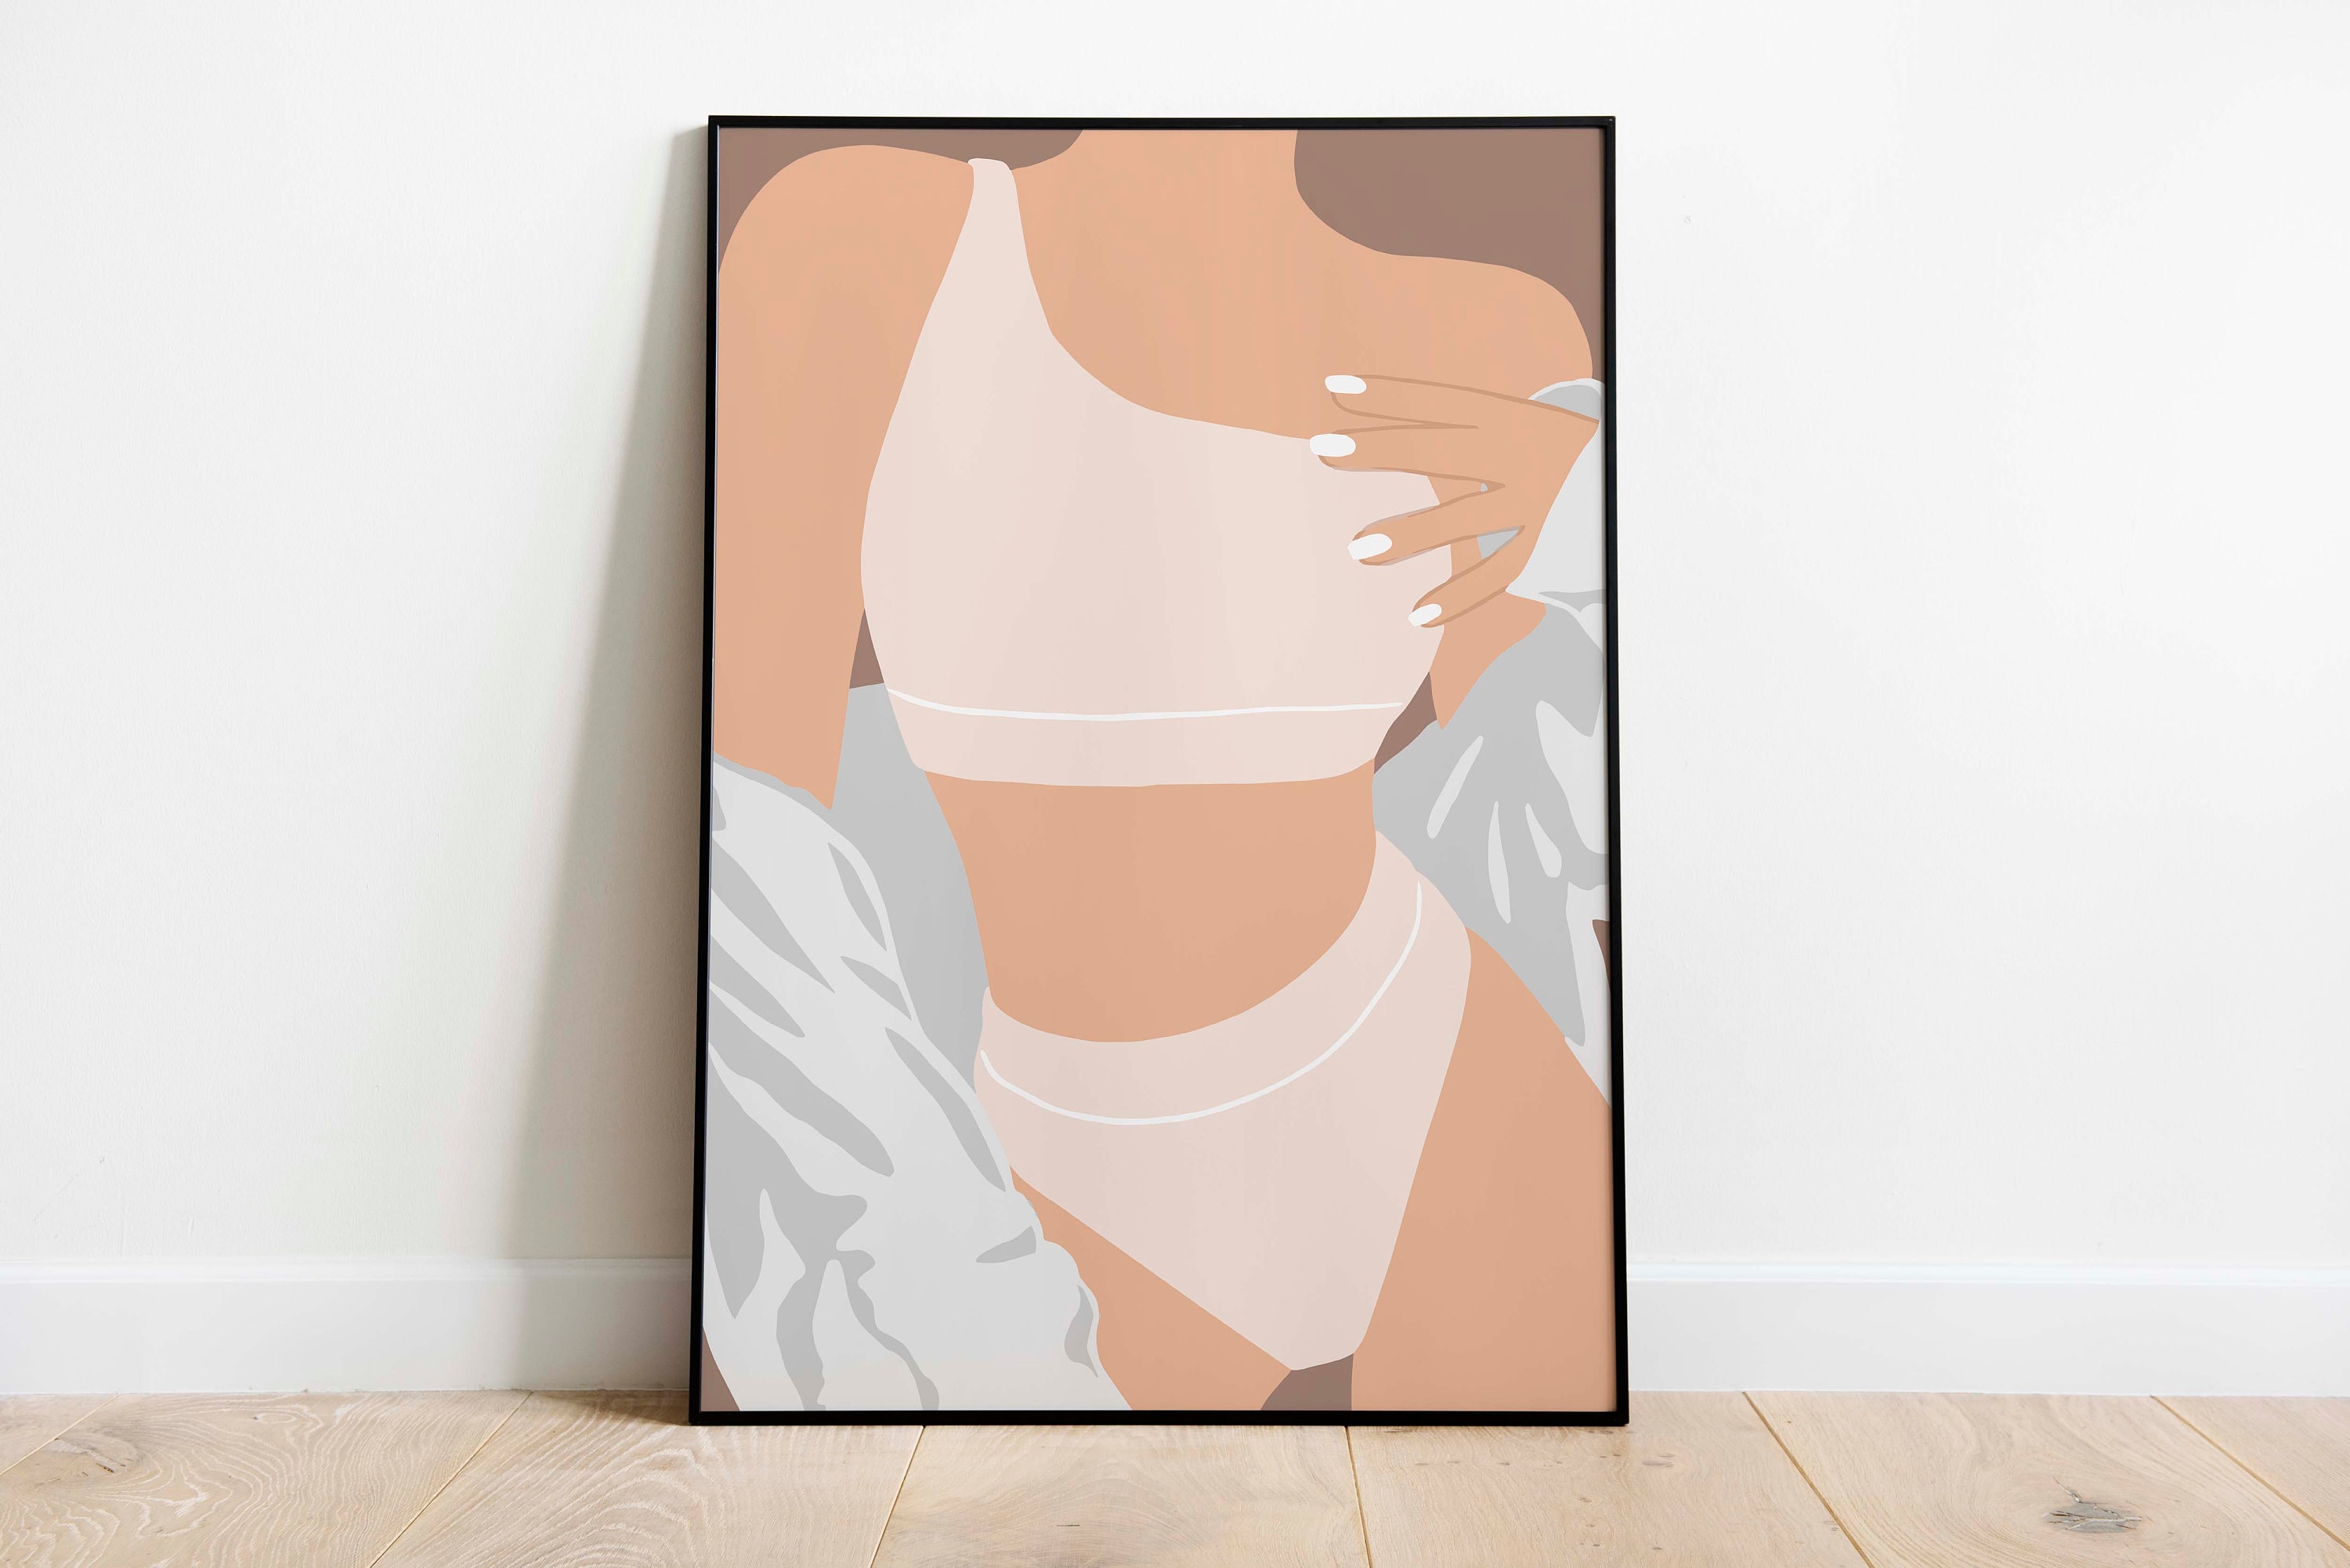 Young woman in very fancy underwear For sale as Framed Prints